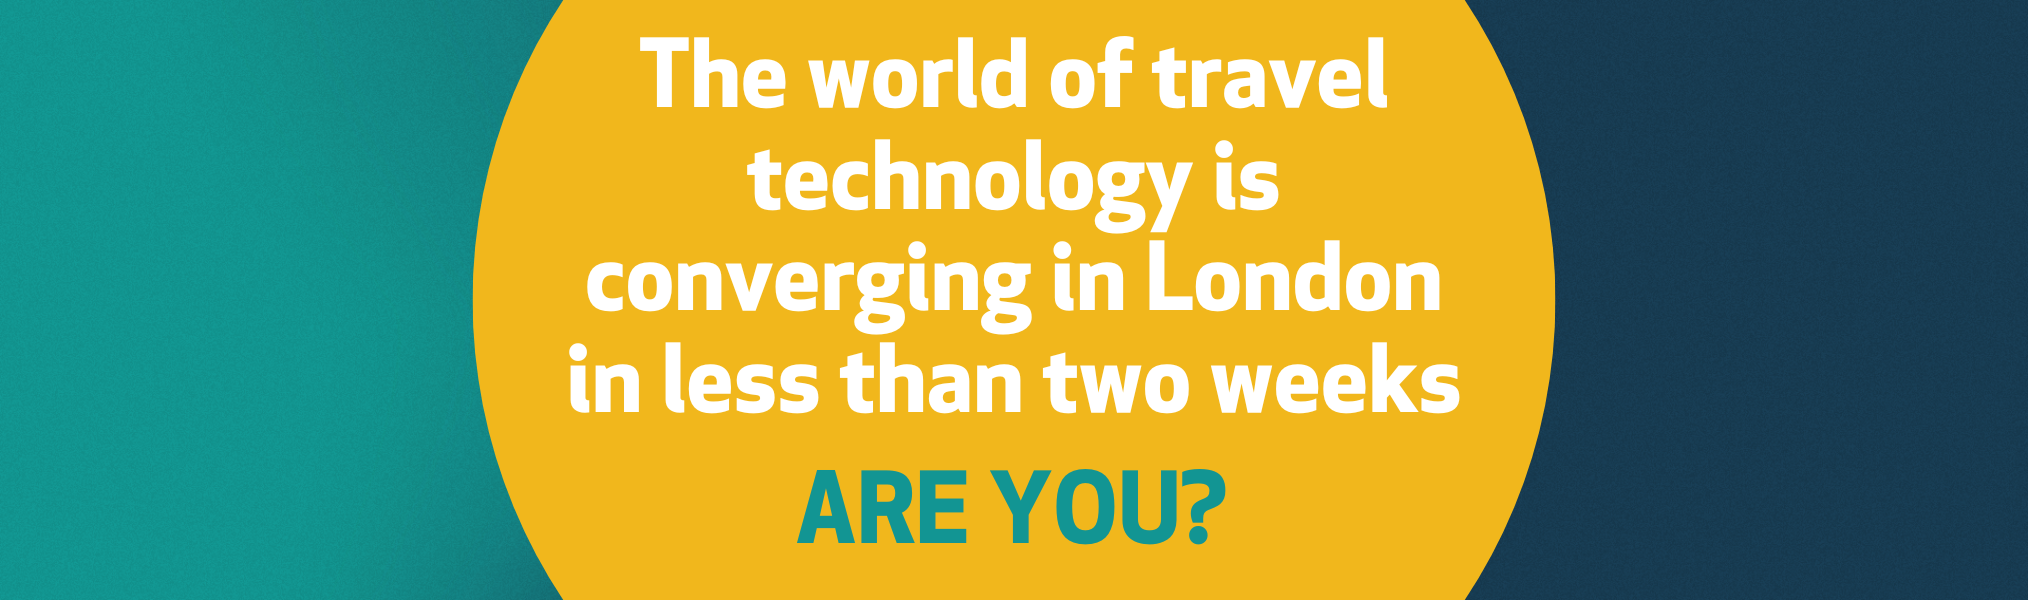 The world of travel technology is converging in London in less than two weeks. Are you? 